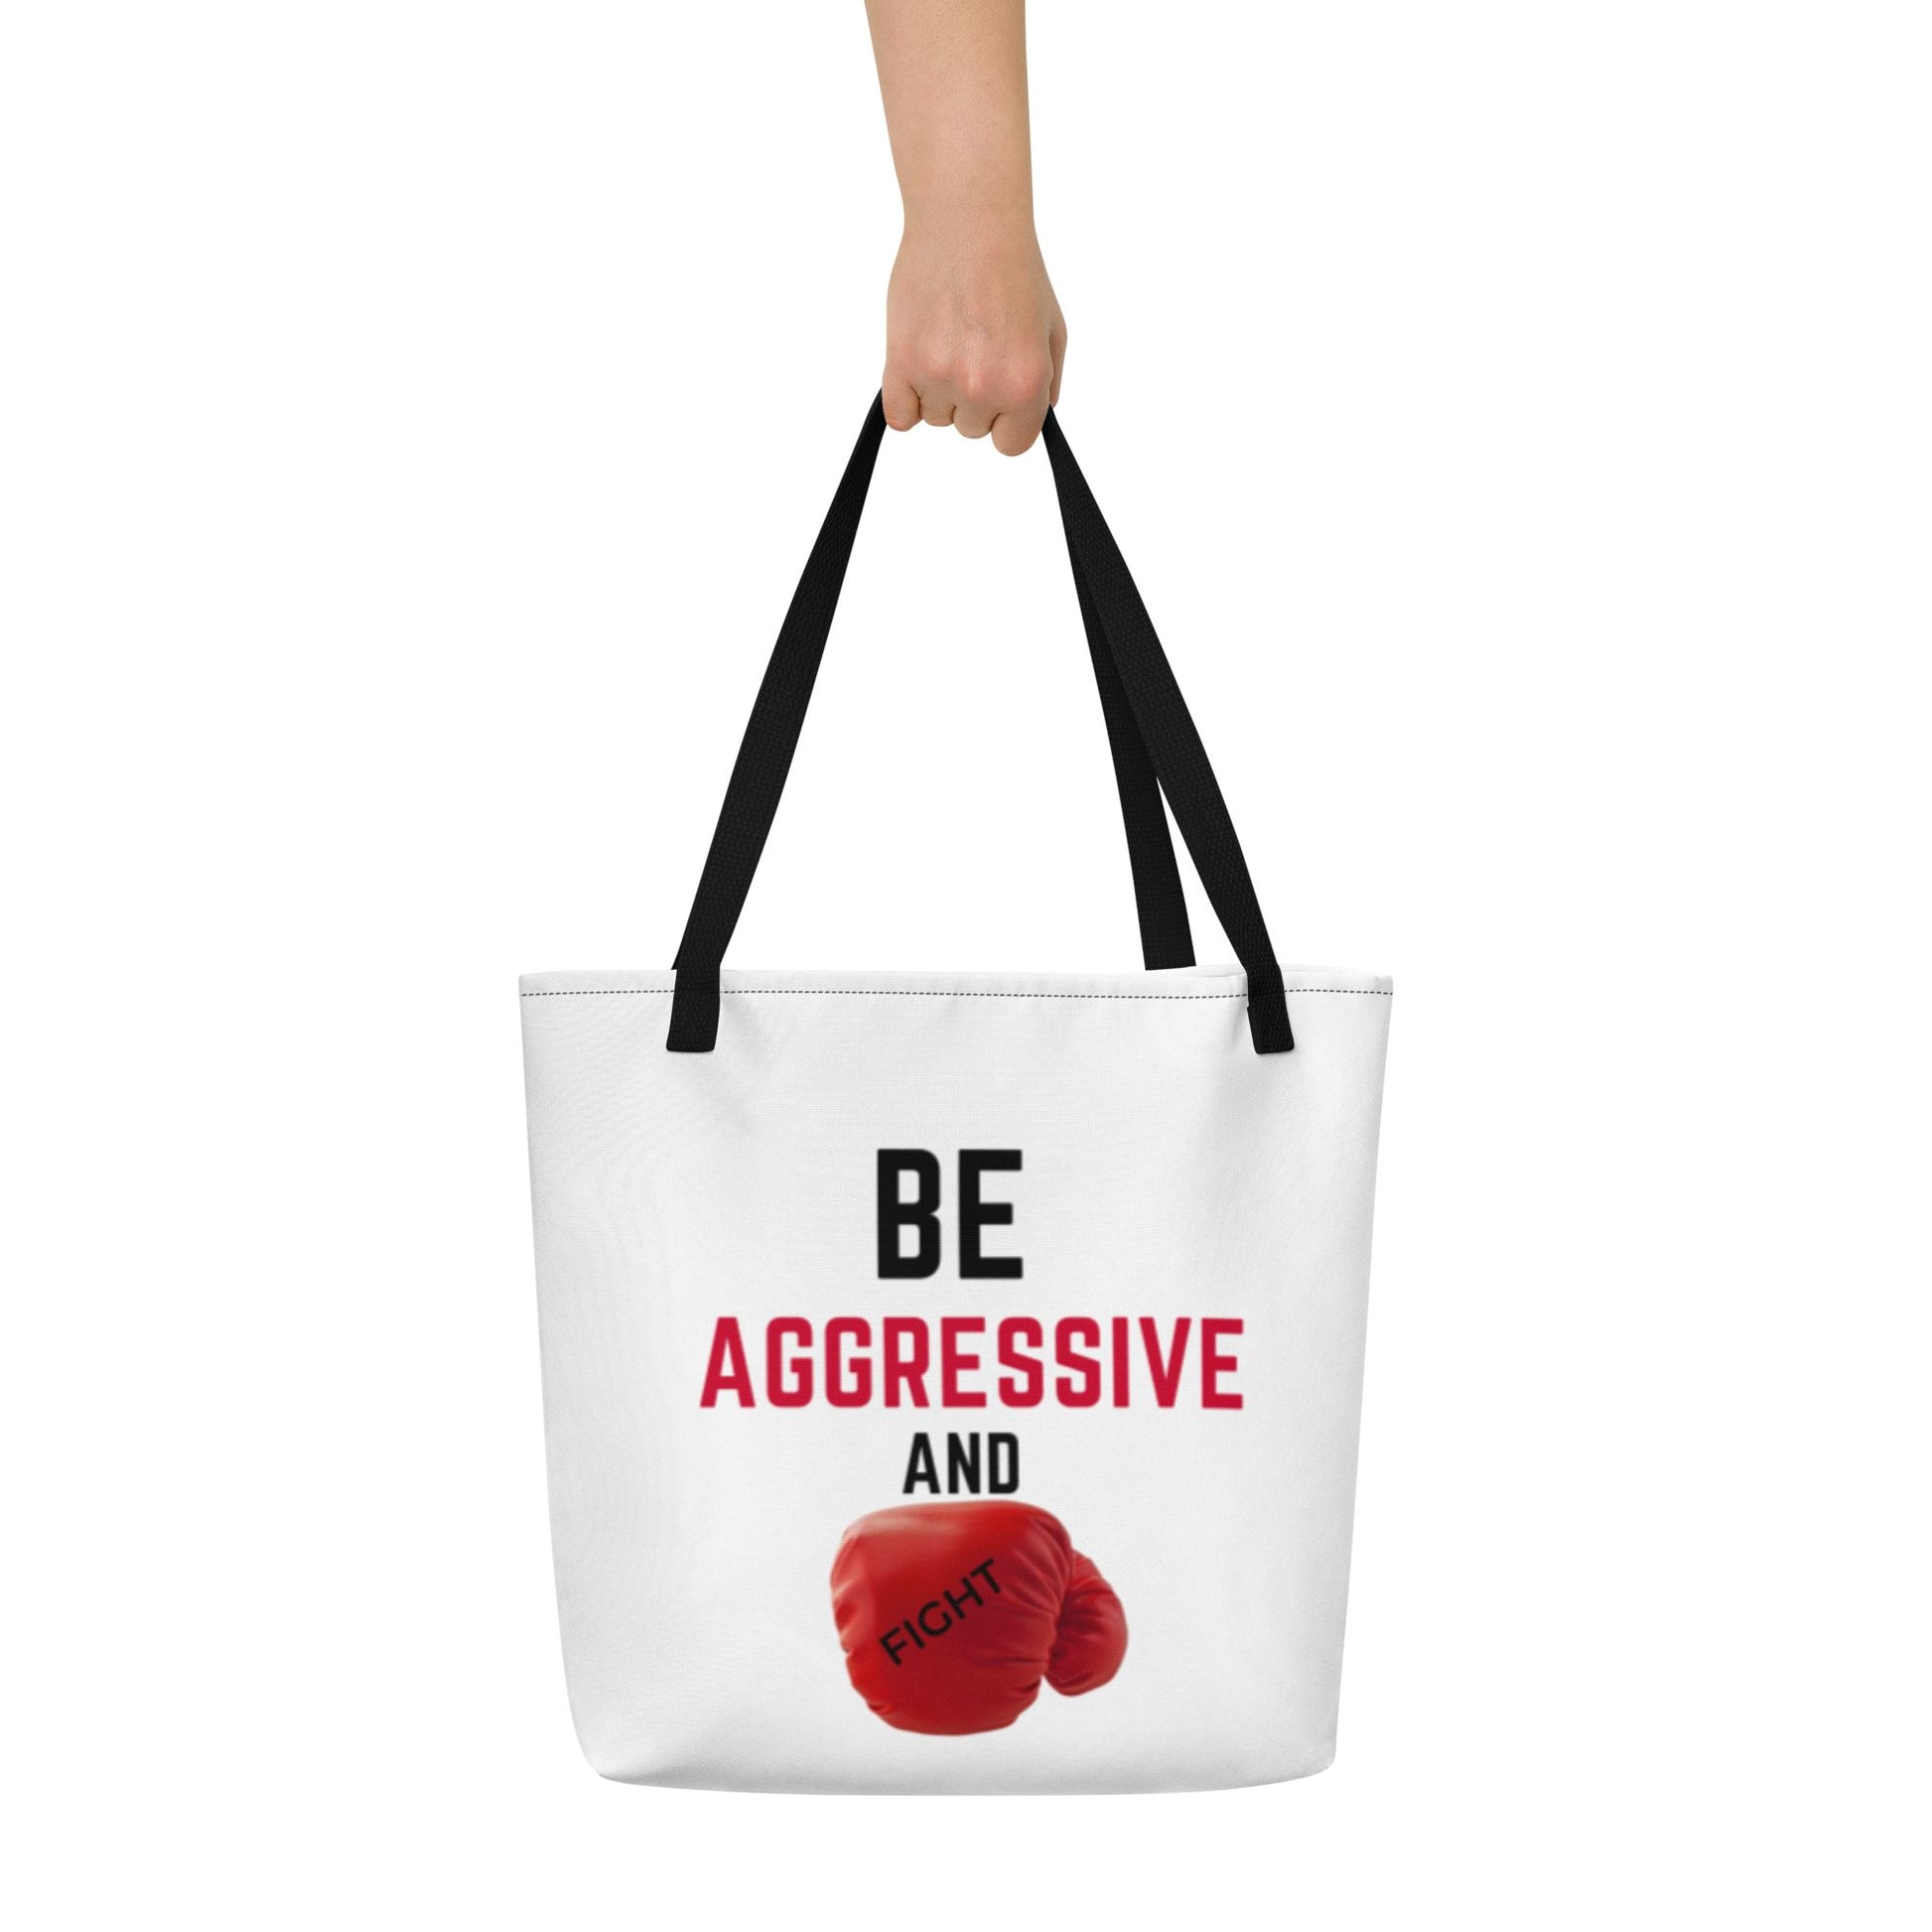 Make a statement with these personalized large tote bags! Crafted from durable materials, they can carry all your essentials in style. Perfect for grocery shopping, beach days, and travel, these custom-printed tote bags are sure to be a go-to favorite.